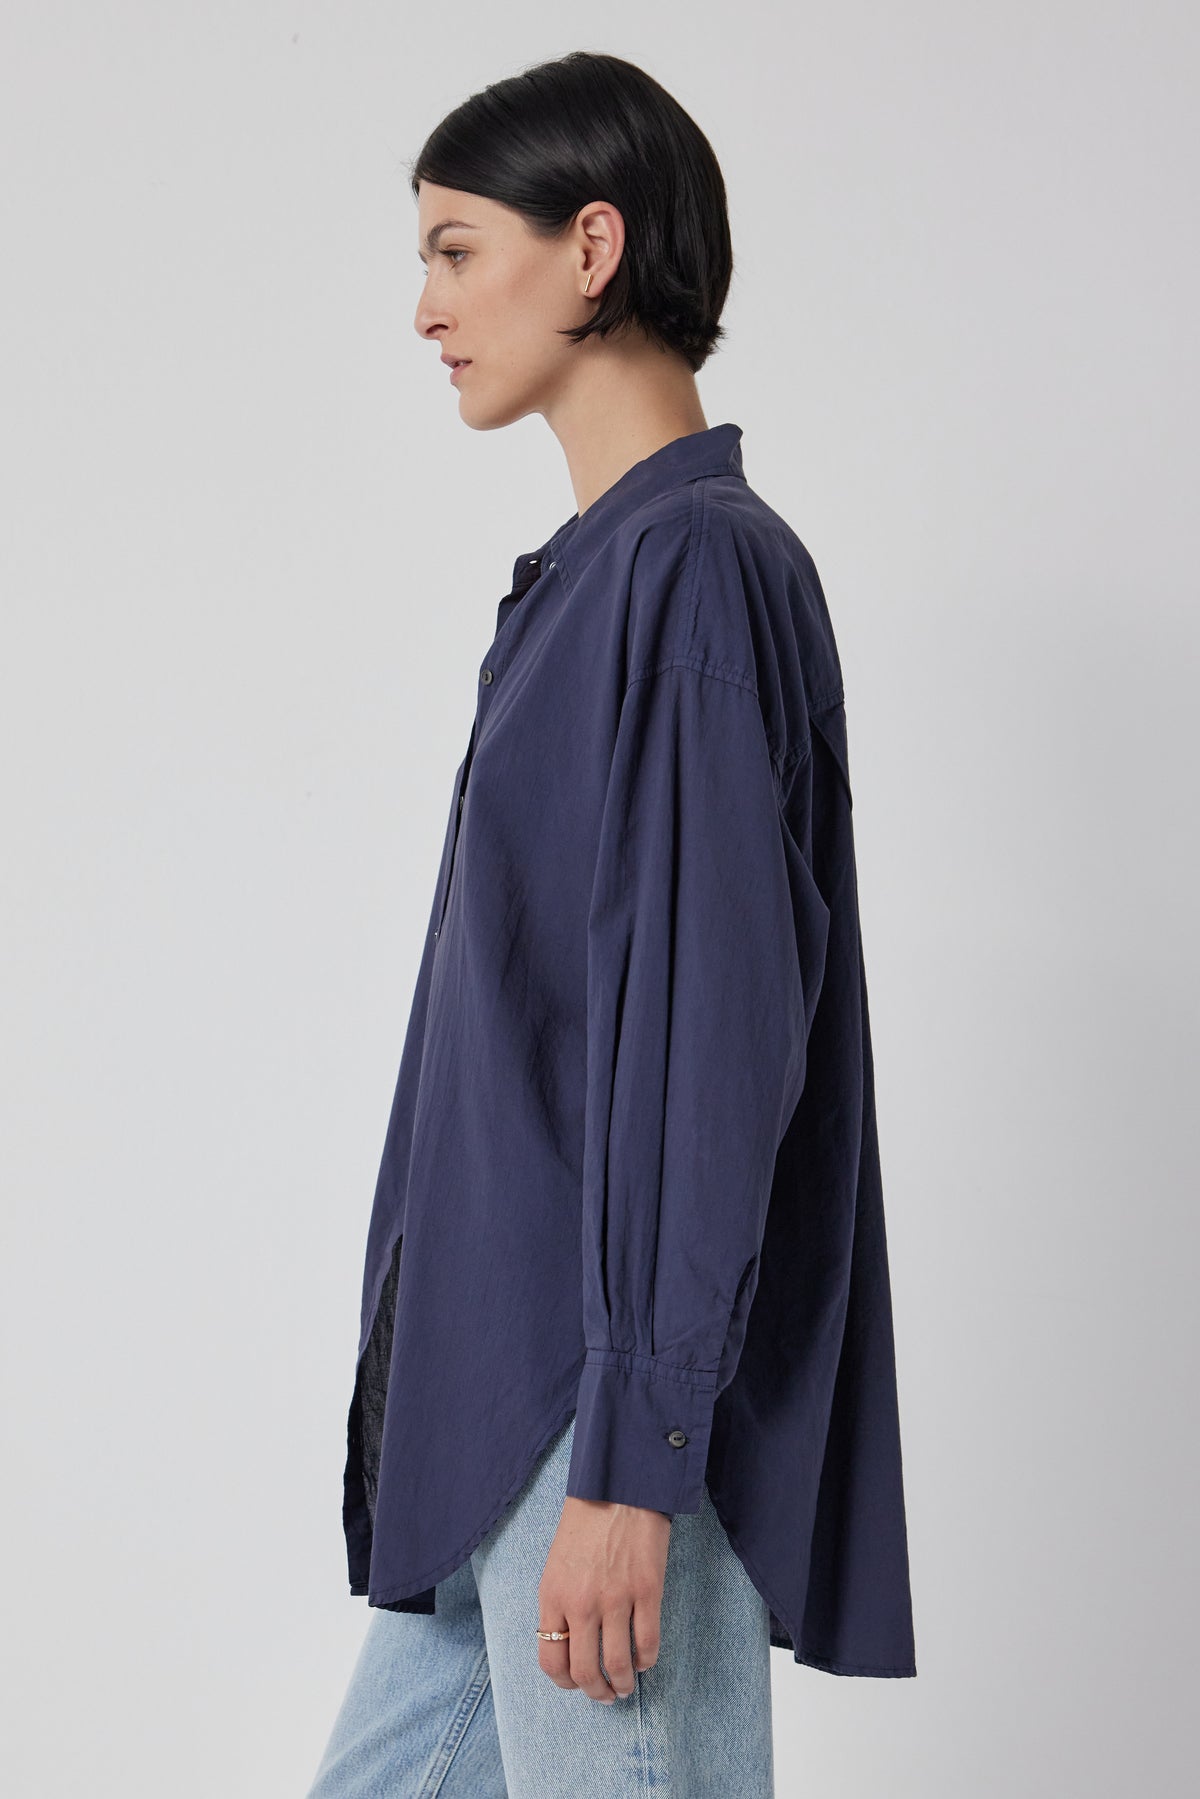   A side profile of a person wearing an oversized navy blue REDONDO button-up shirt made from soft cotton shirting and light blue relaxed trousers against a neutral background by Velvet by Jenny Graham. 